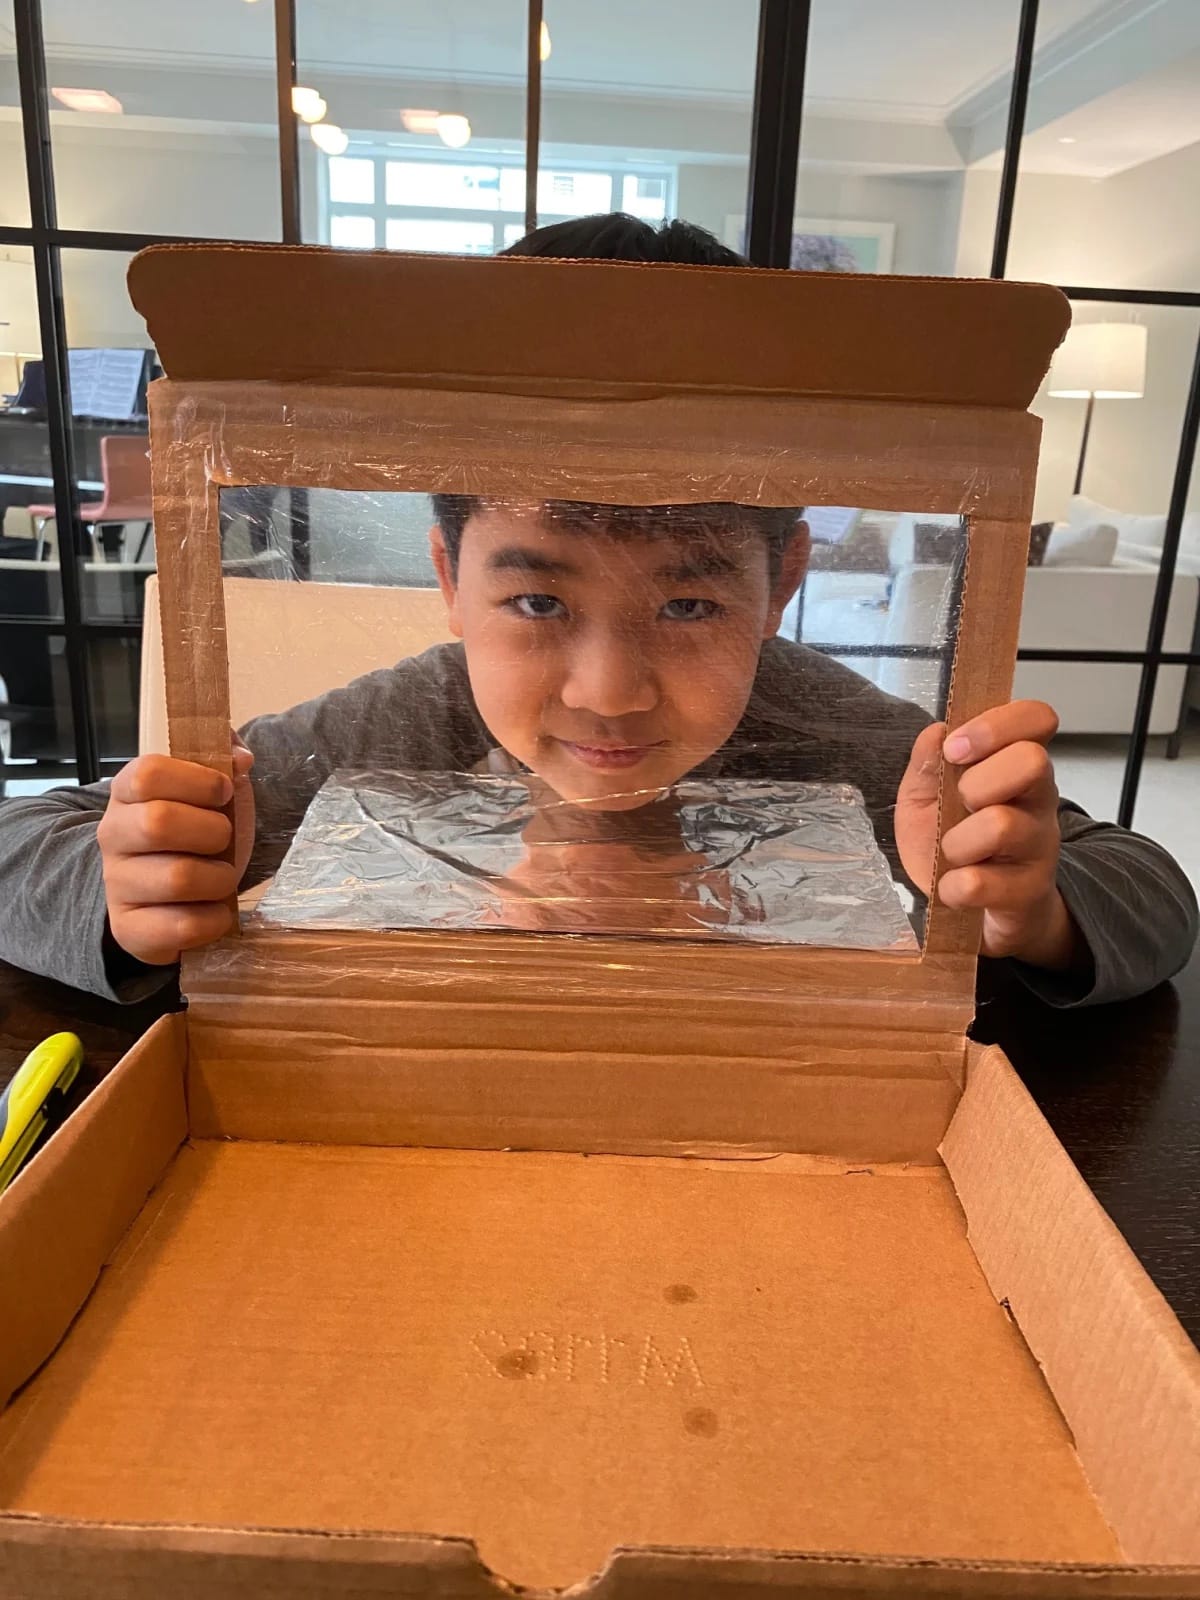 Student poses with solar oven